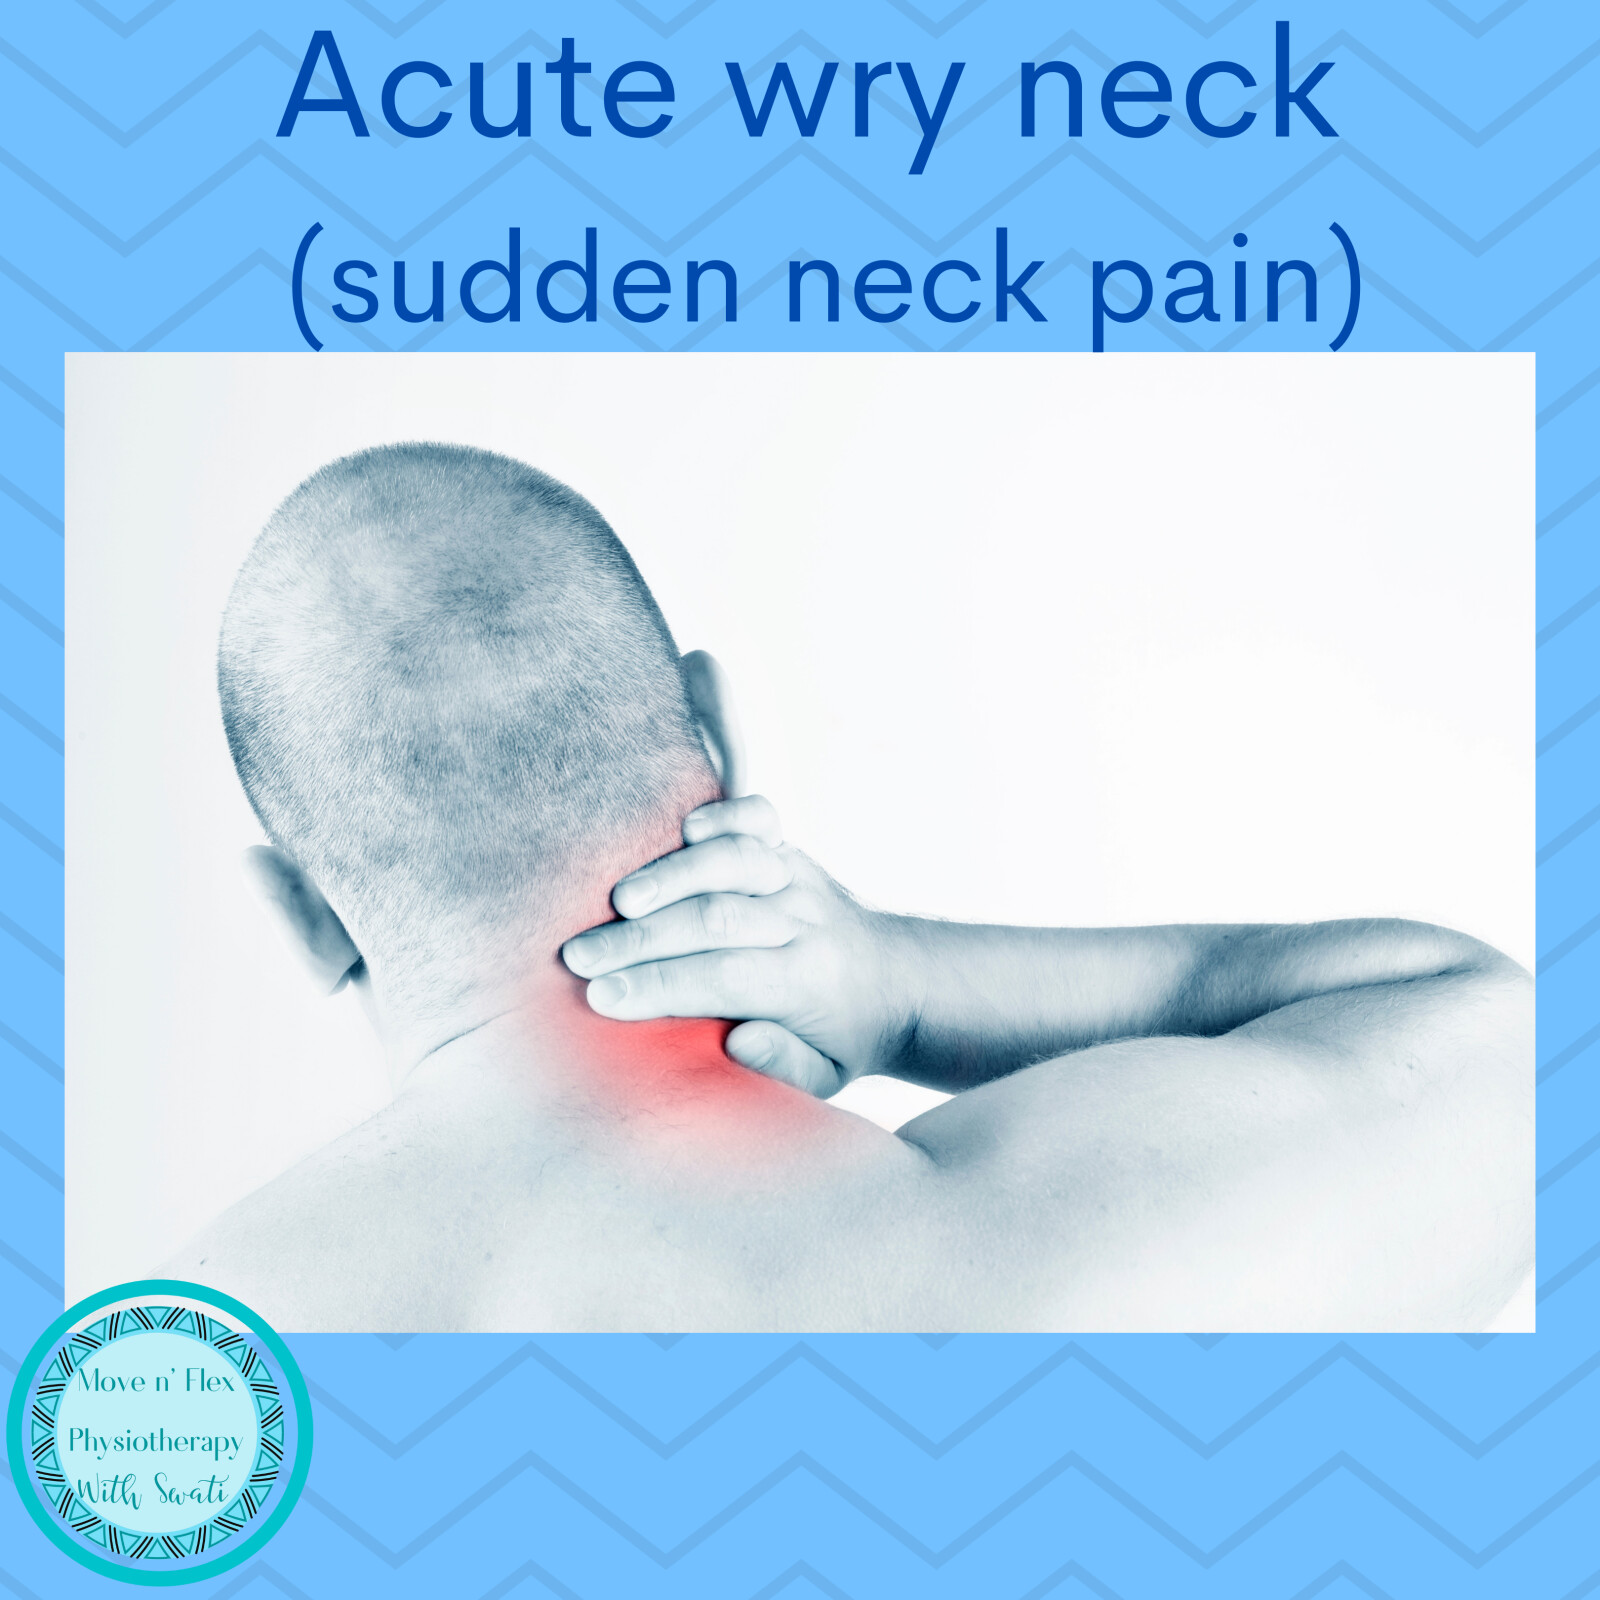  5 symptoms that indicate you have a wry neck